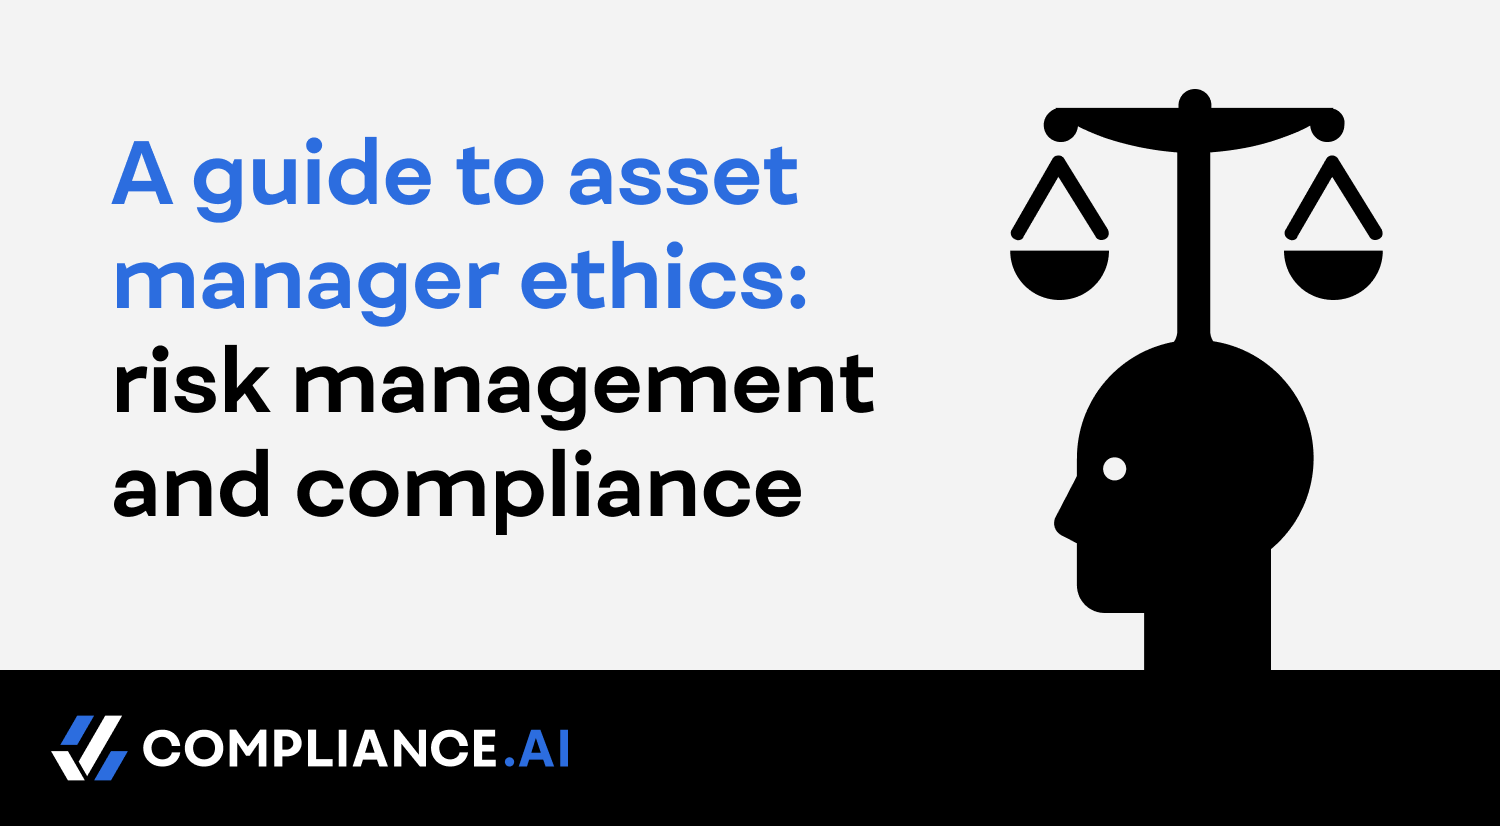 A guide to asset manager ethics: risk management and compliance